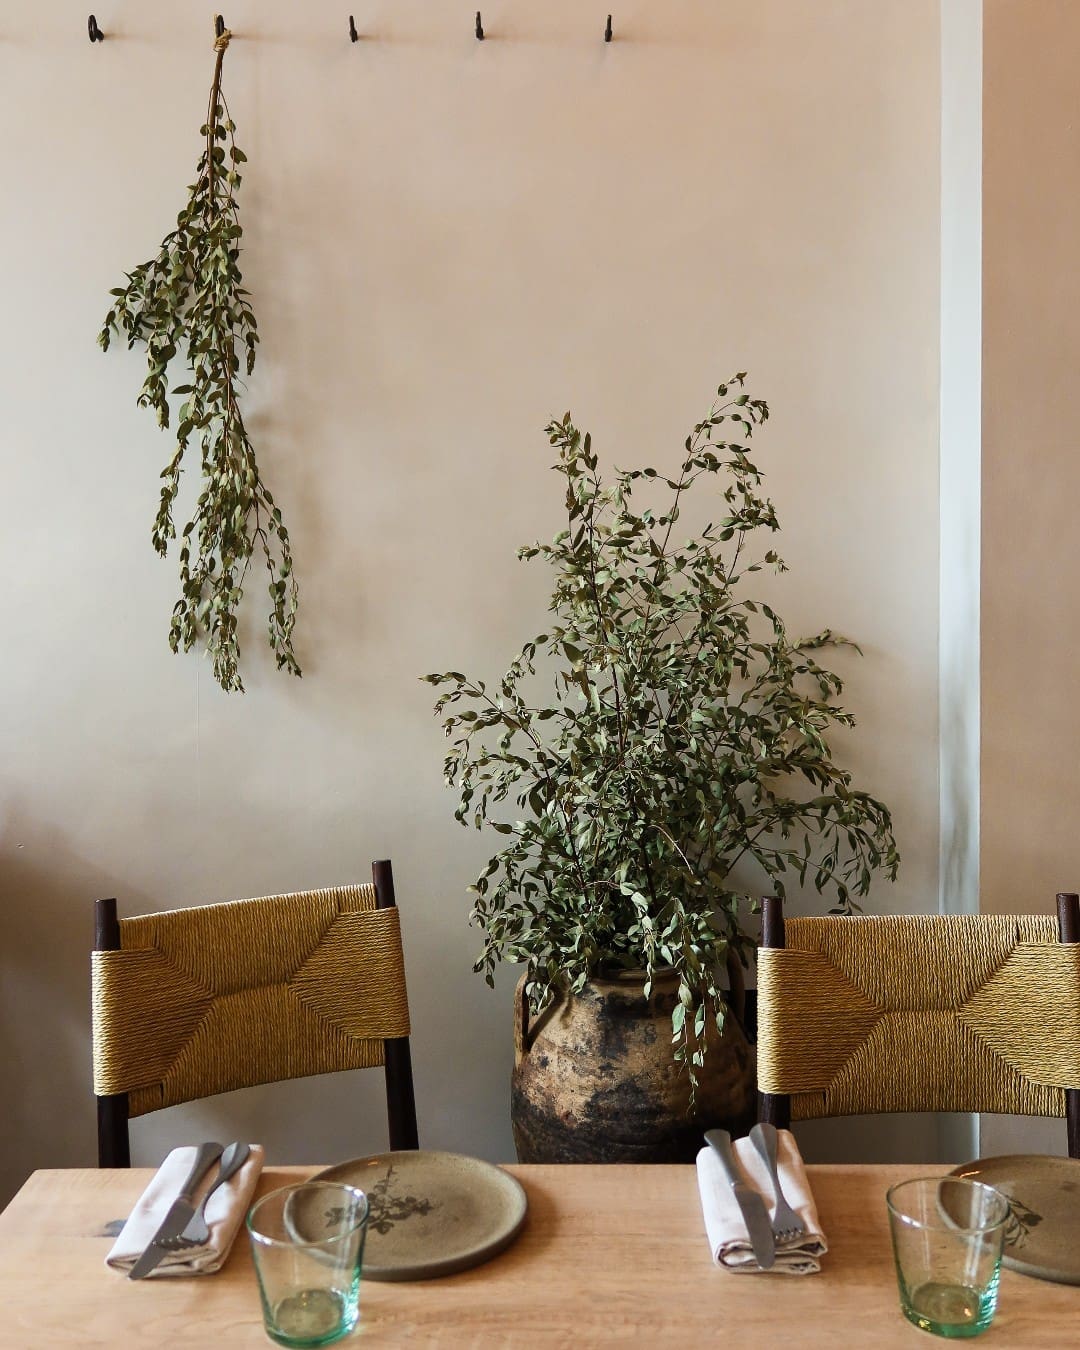 The best restaurants in London | airy interiors and greenery at Akub, Notting Hill